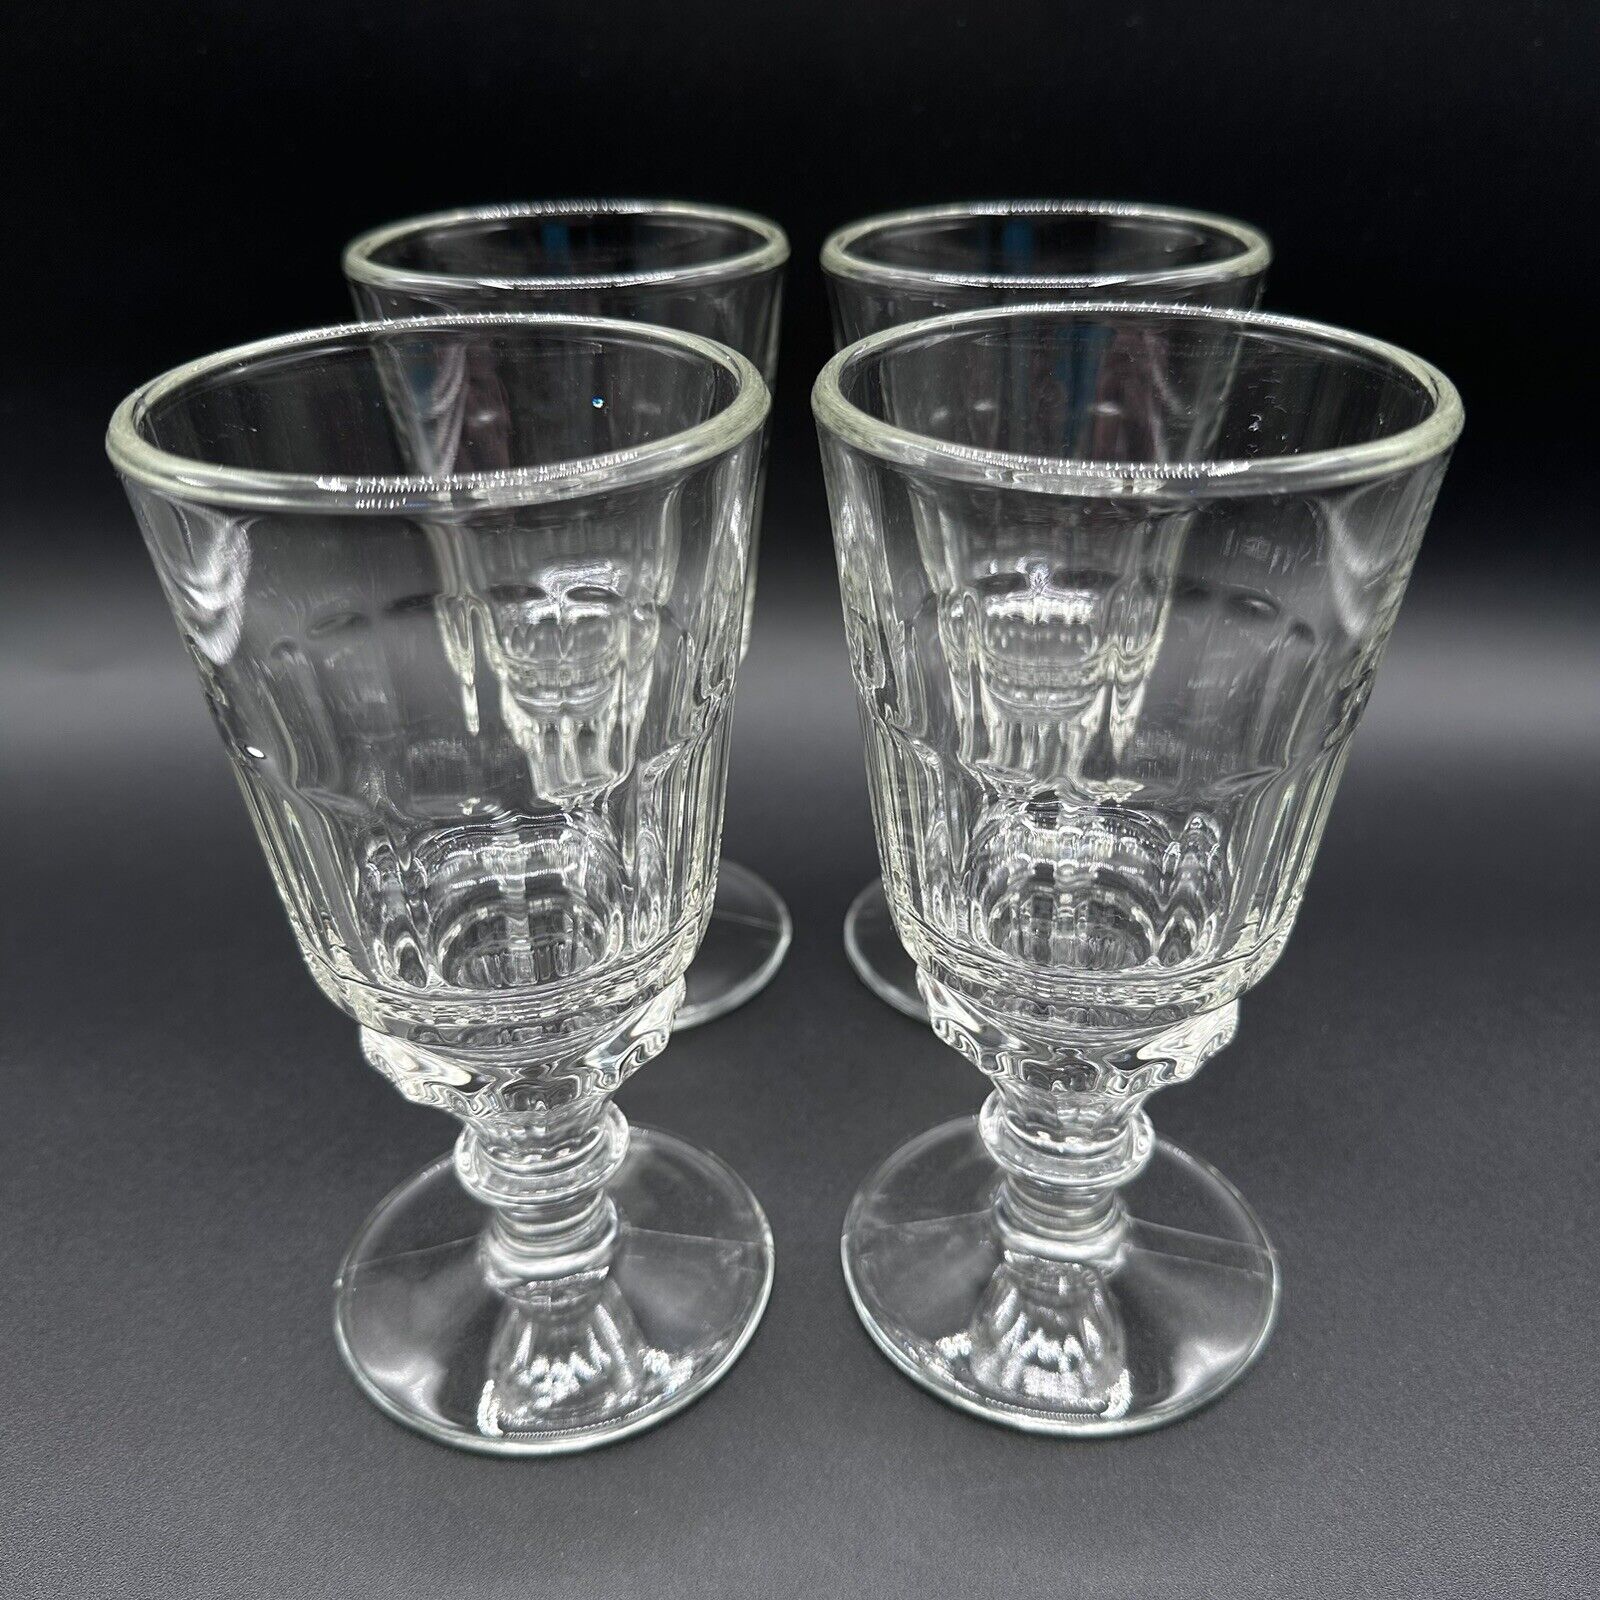 (4) Musees De L’ Absinthe Glasses Set French Wine Drinking Glass Vintage Antique